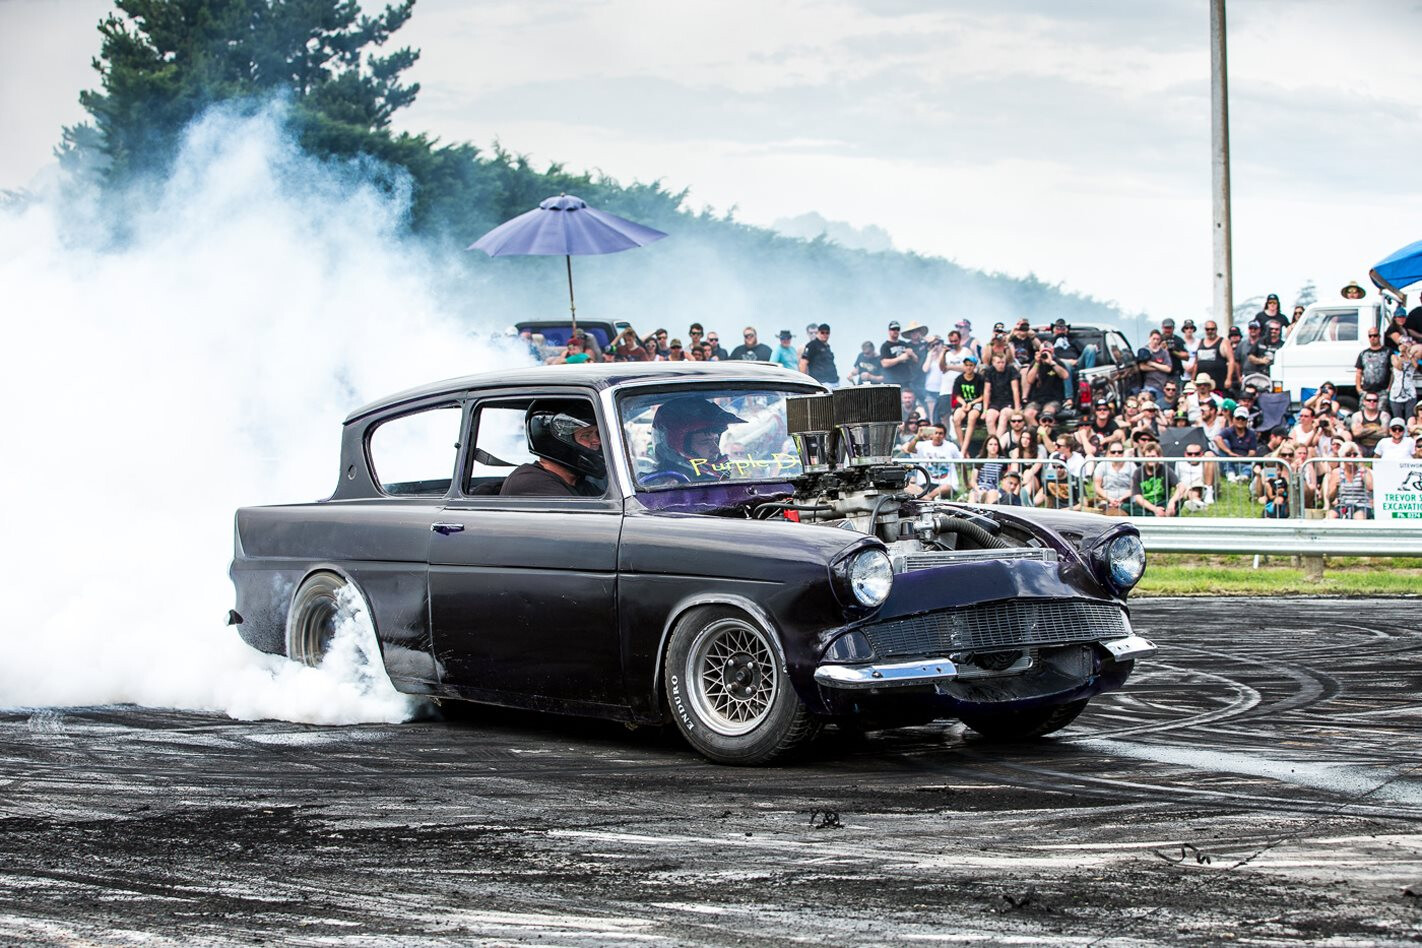 VIDEO: MUSCLE CAR MADNESS BURNOUTS IN NEW ZEALAND